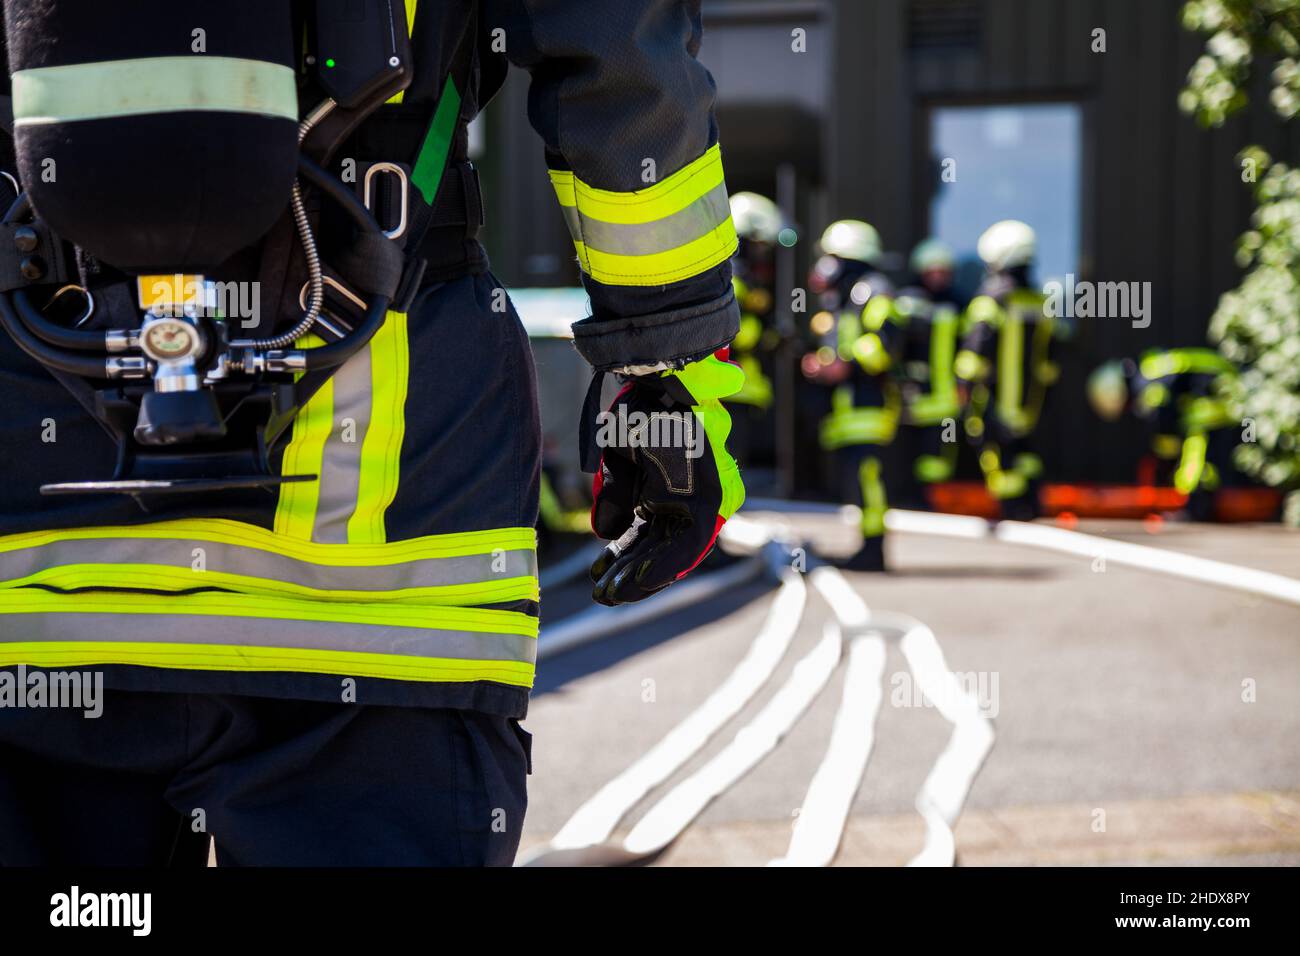 glove, protective workwear, fire department, gloves, protective workwears, fire departments Stock Photo